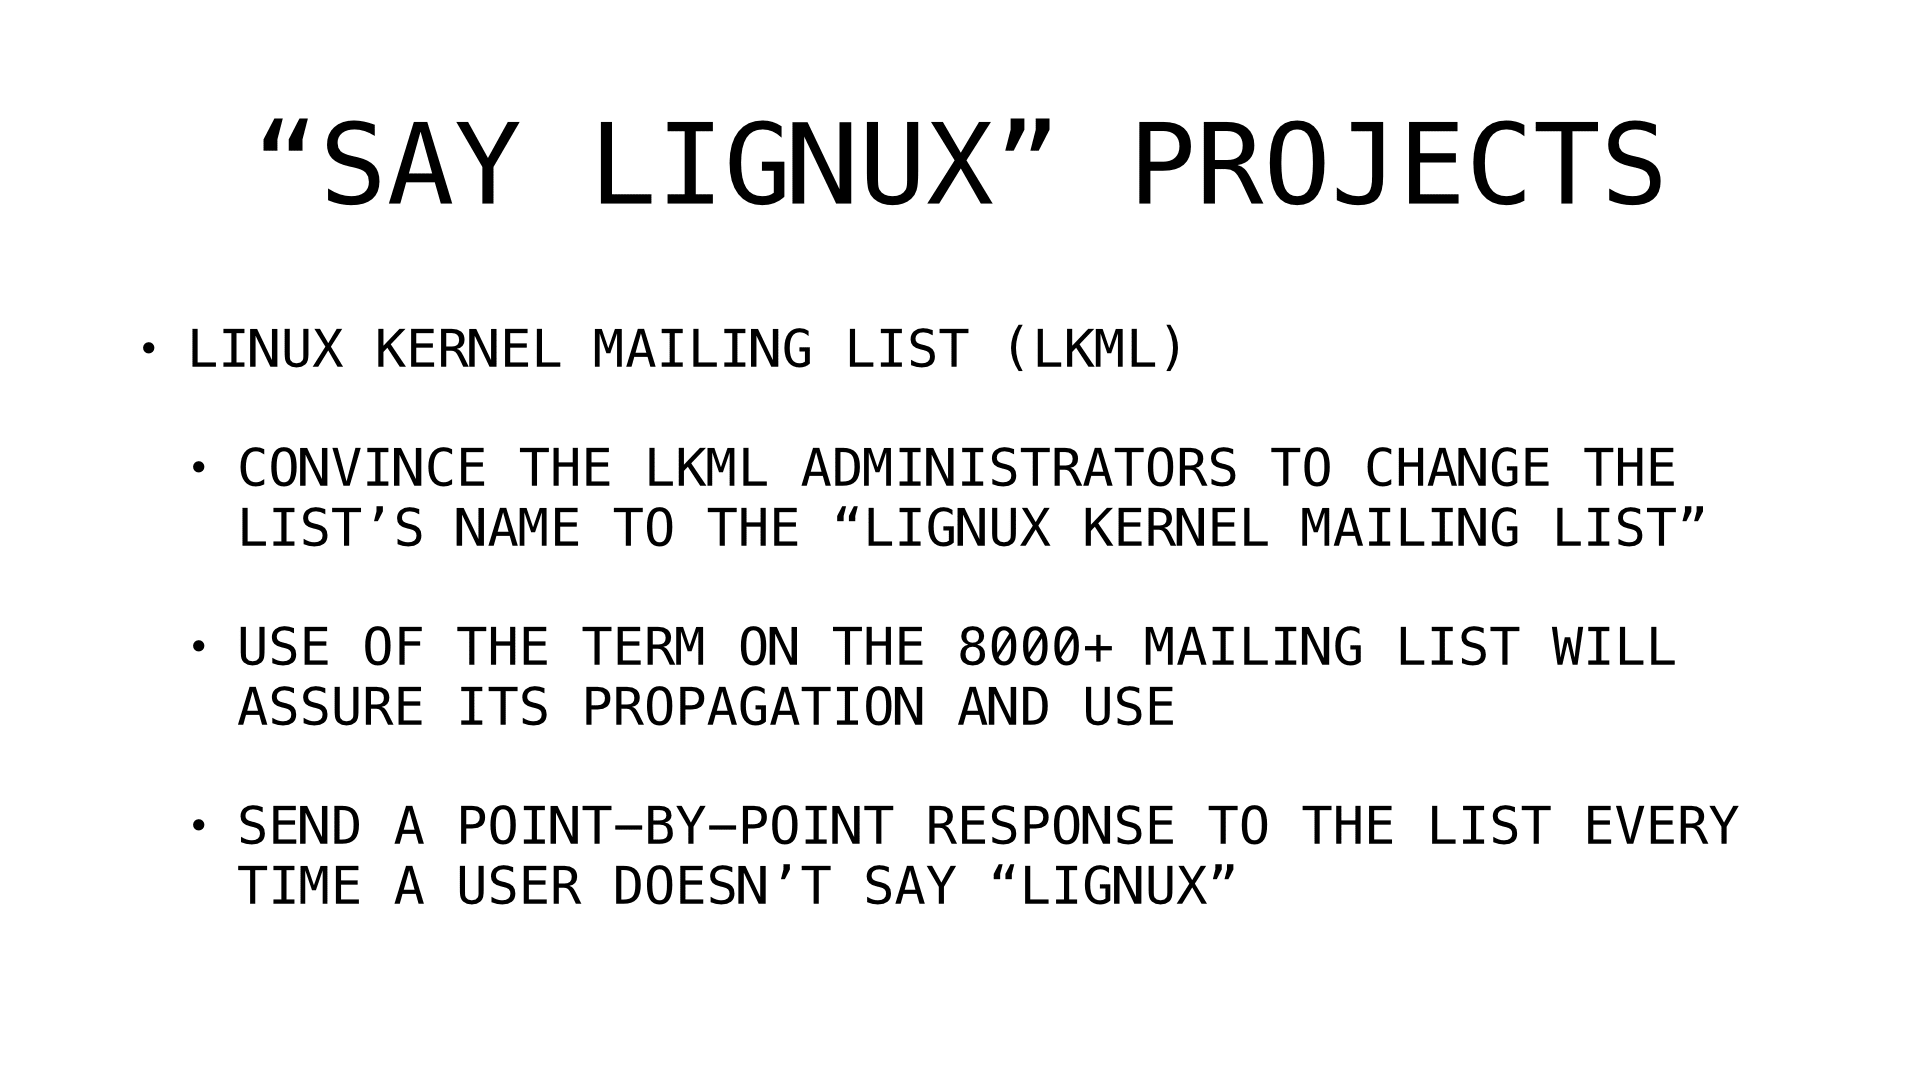 say lignux projects 1